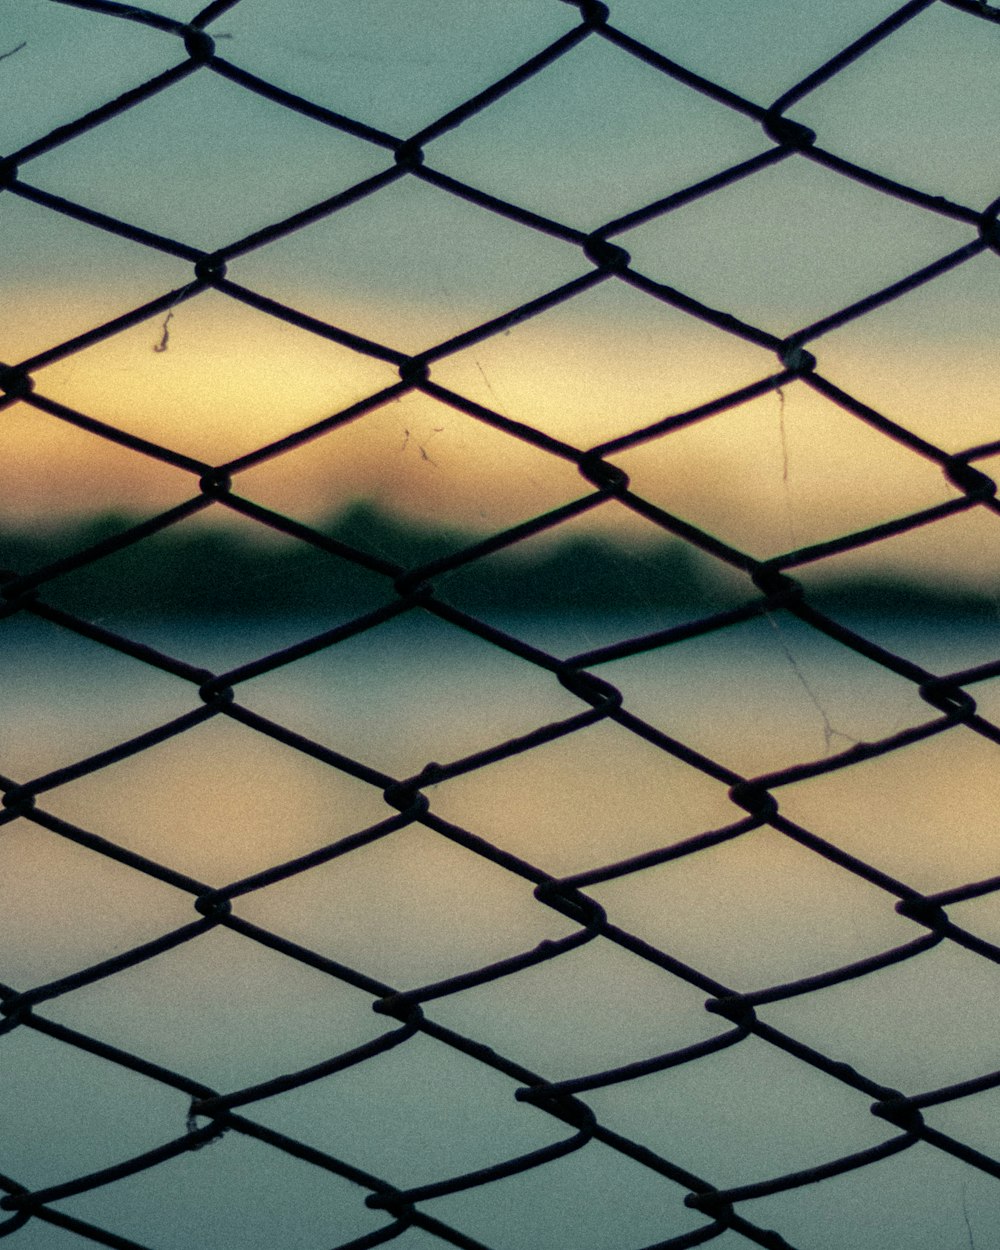 black metal wire fence close-up photography